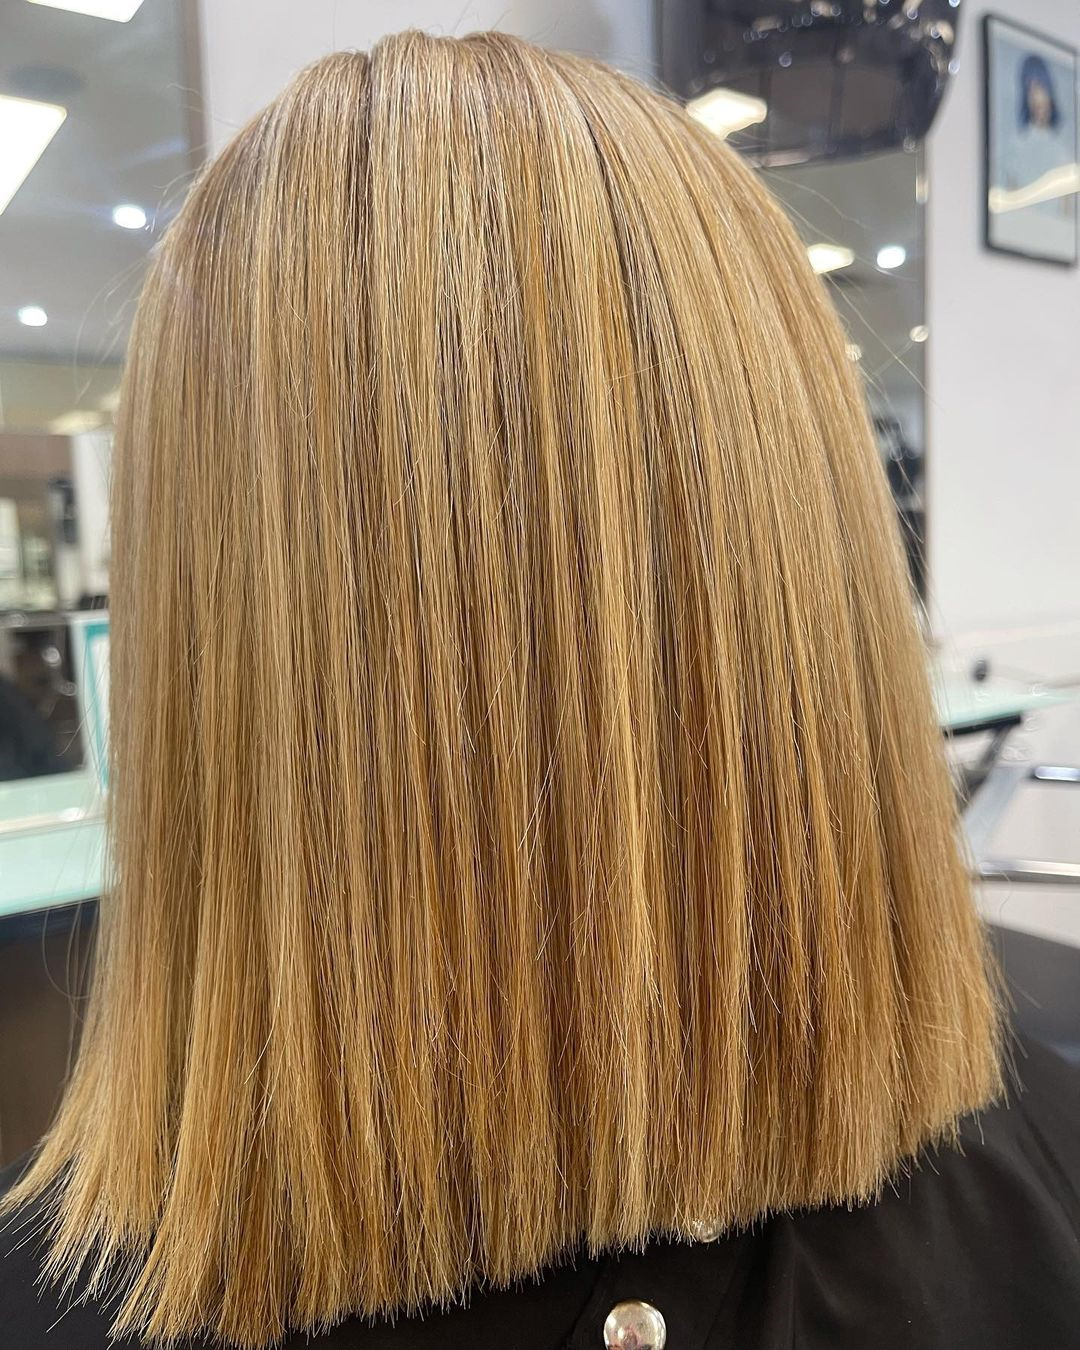 Get the best Keratin Treatments in Melbourne at cuttershairdressing